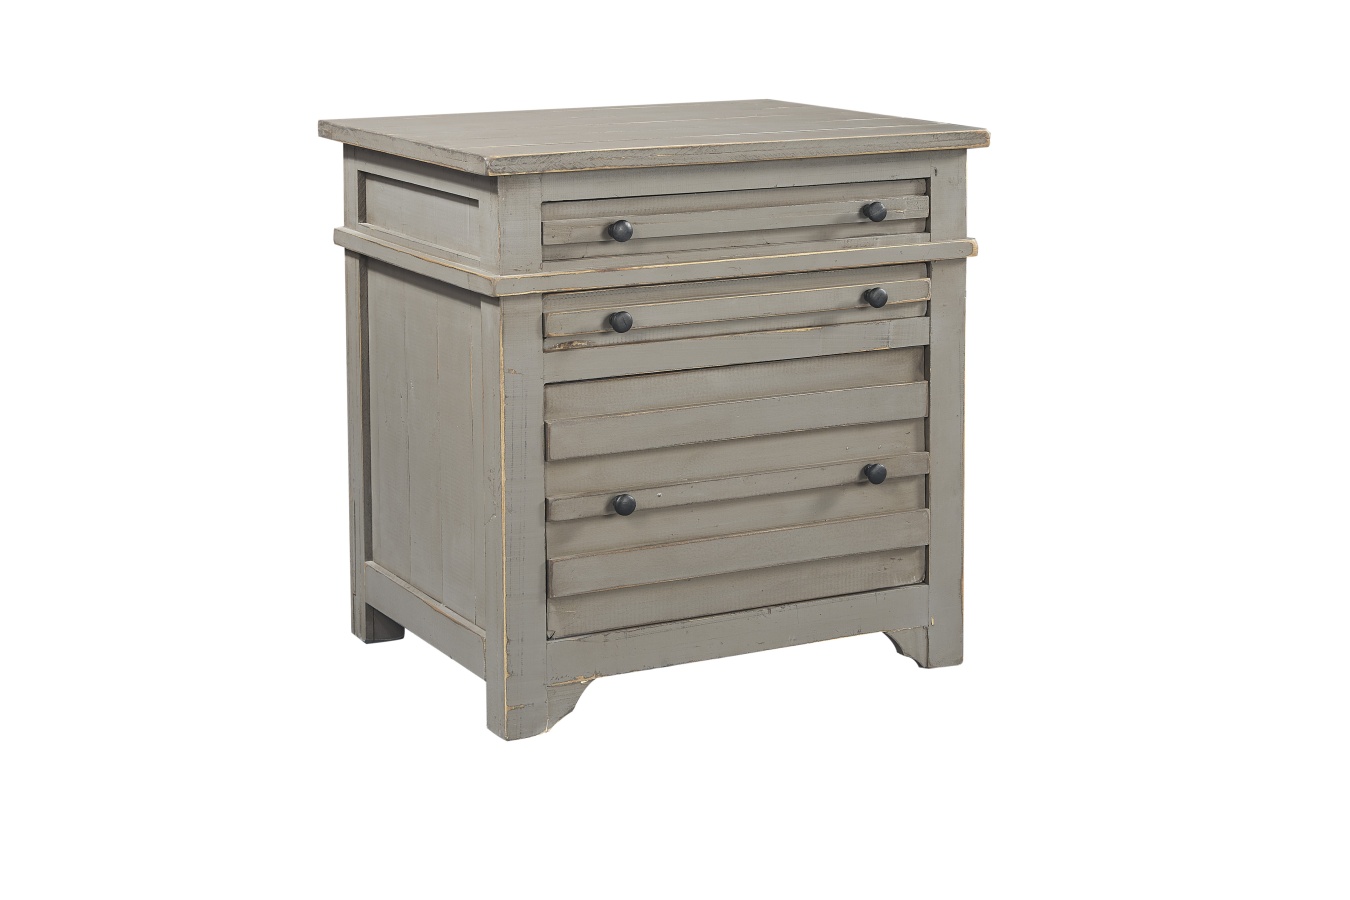 Reeds Farm Weathered Grey Filing Cabinet